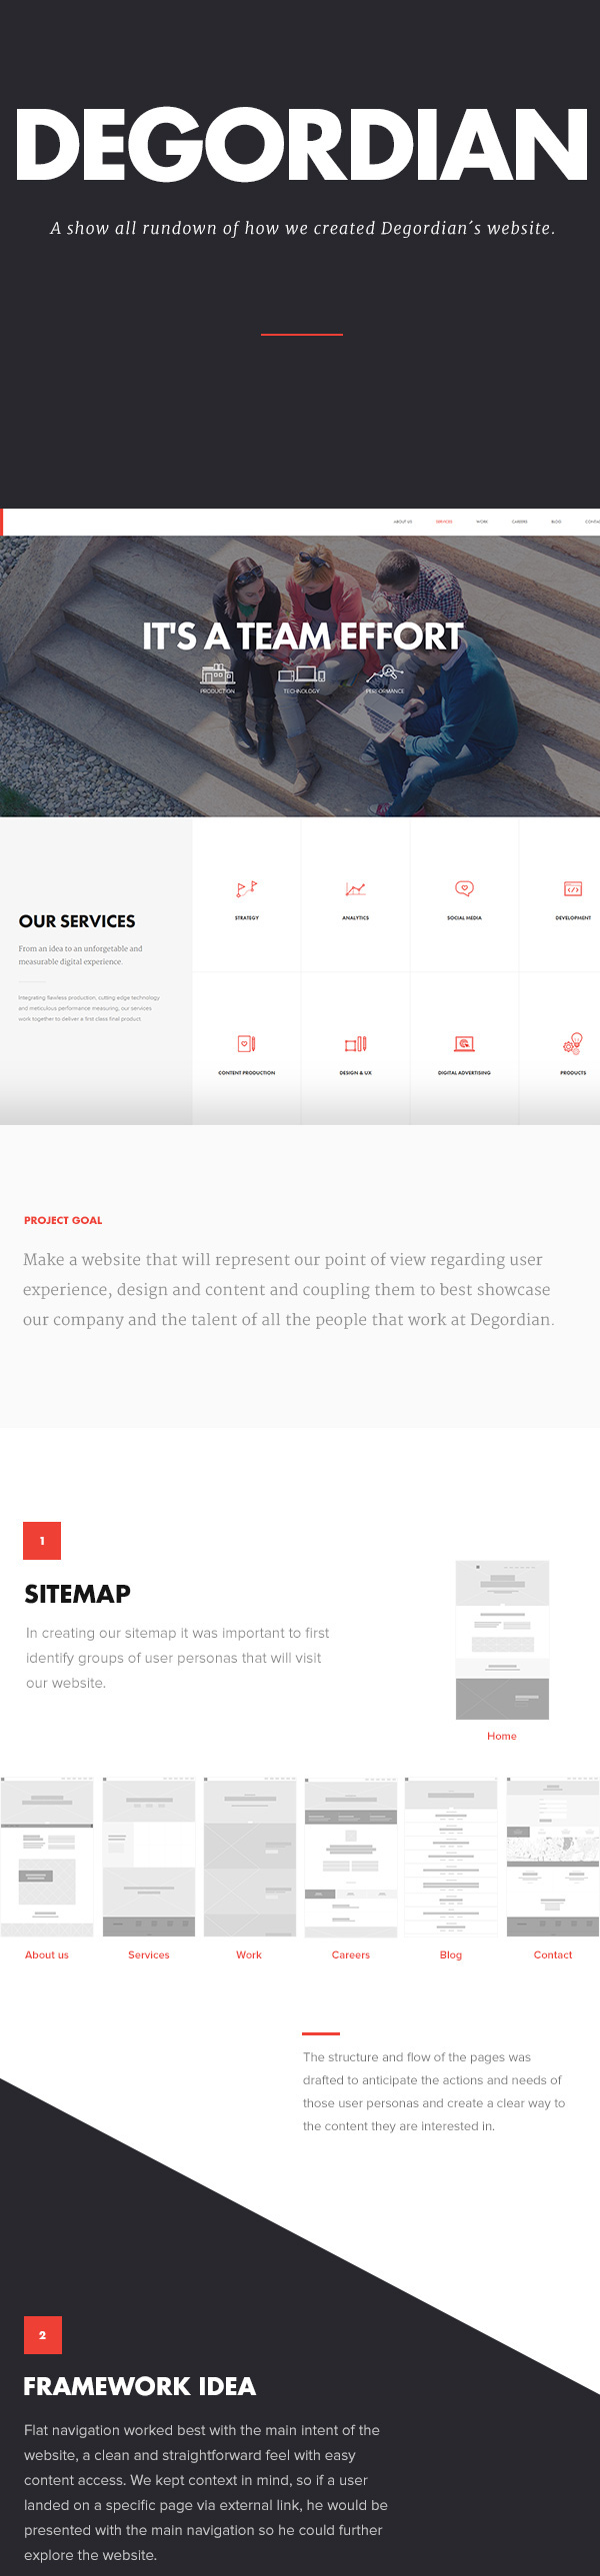 interaction Transition Layout creative simple typo agency clear flat digital ia digital agency inspirational Web